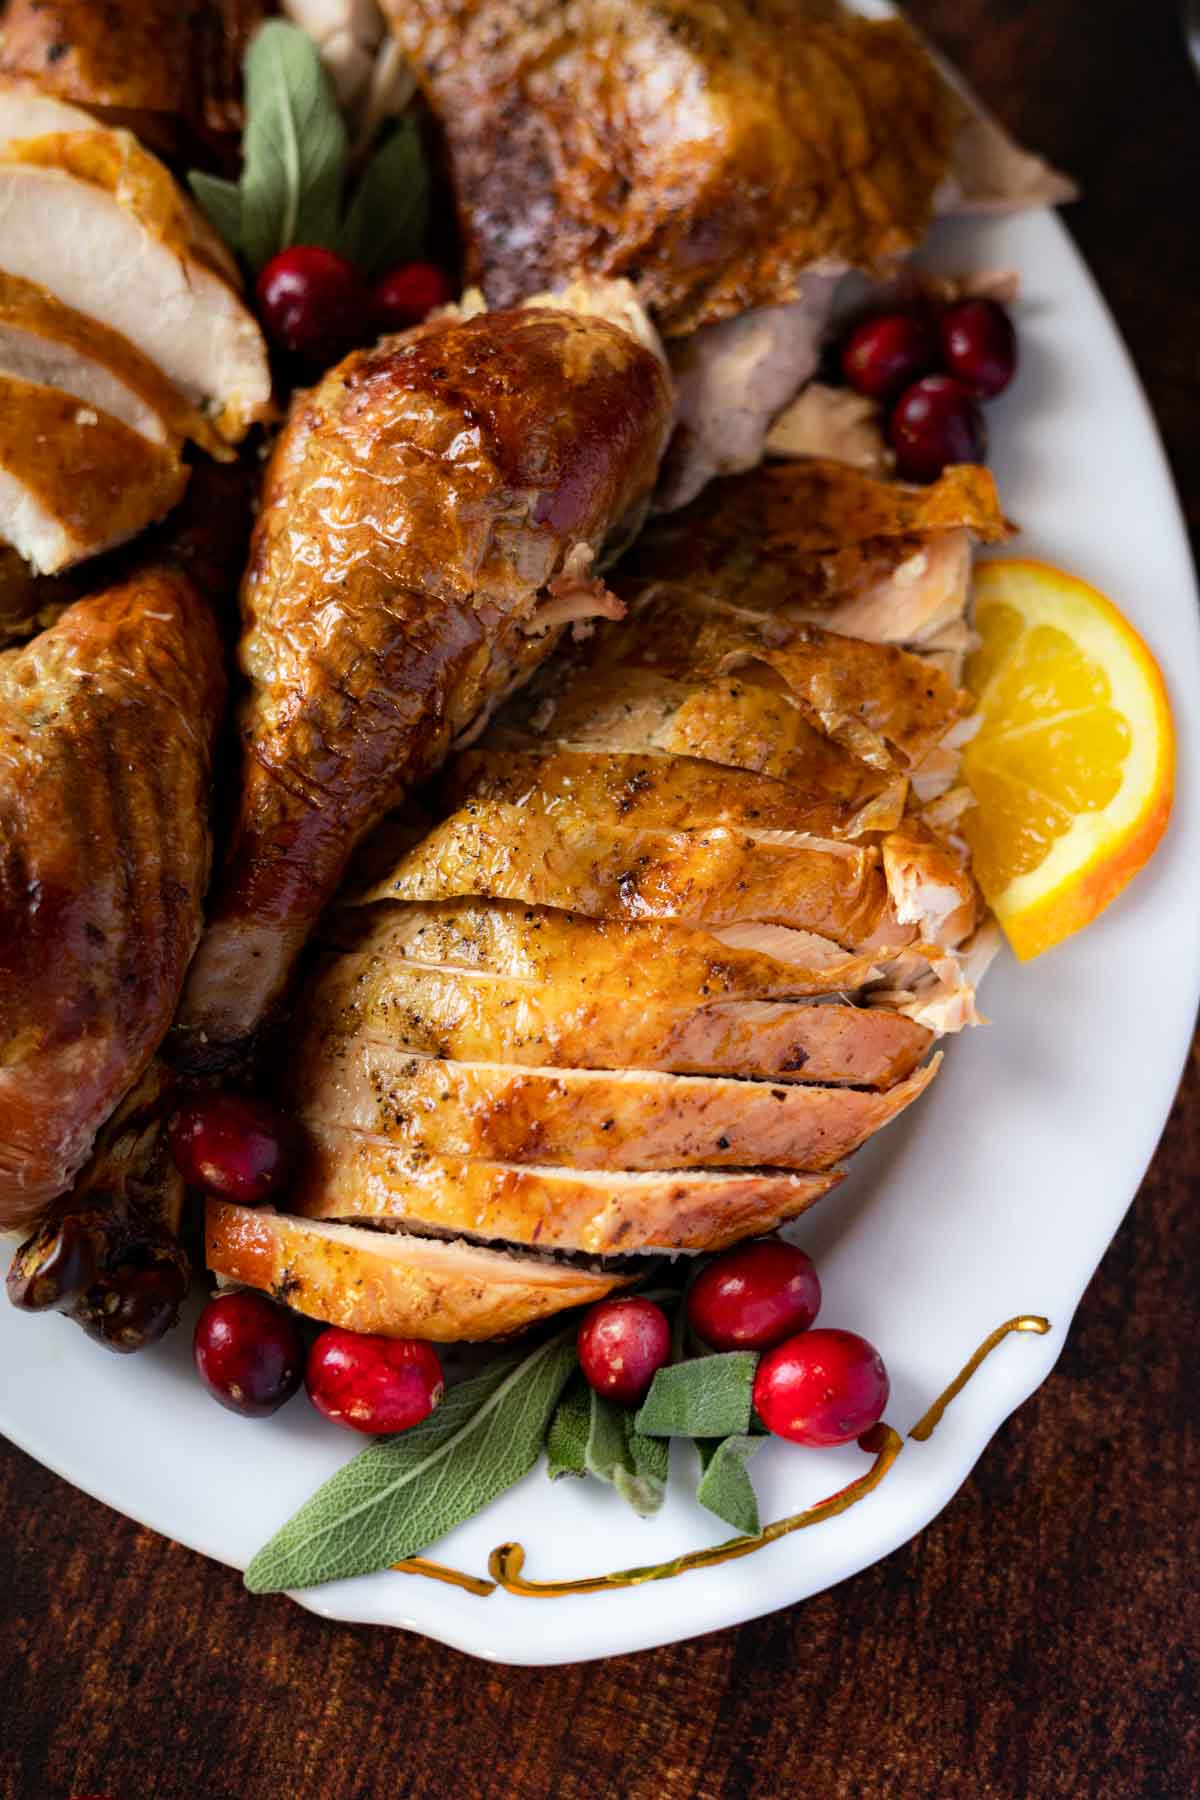 Roasted turkey with sage and sliced oranges.